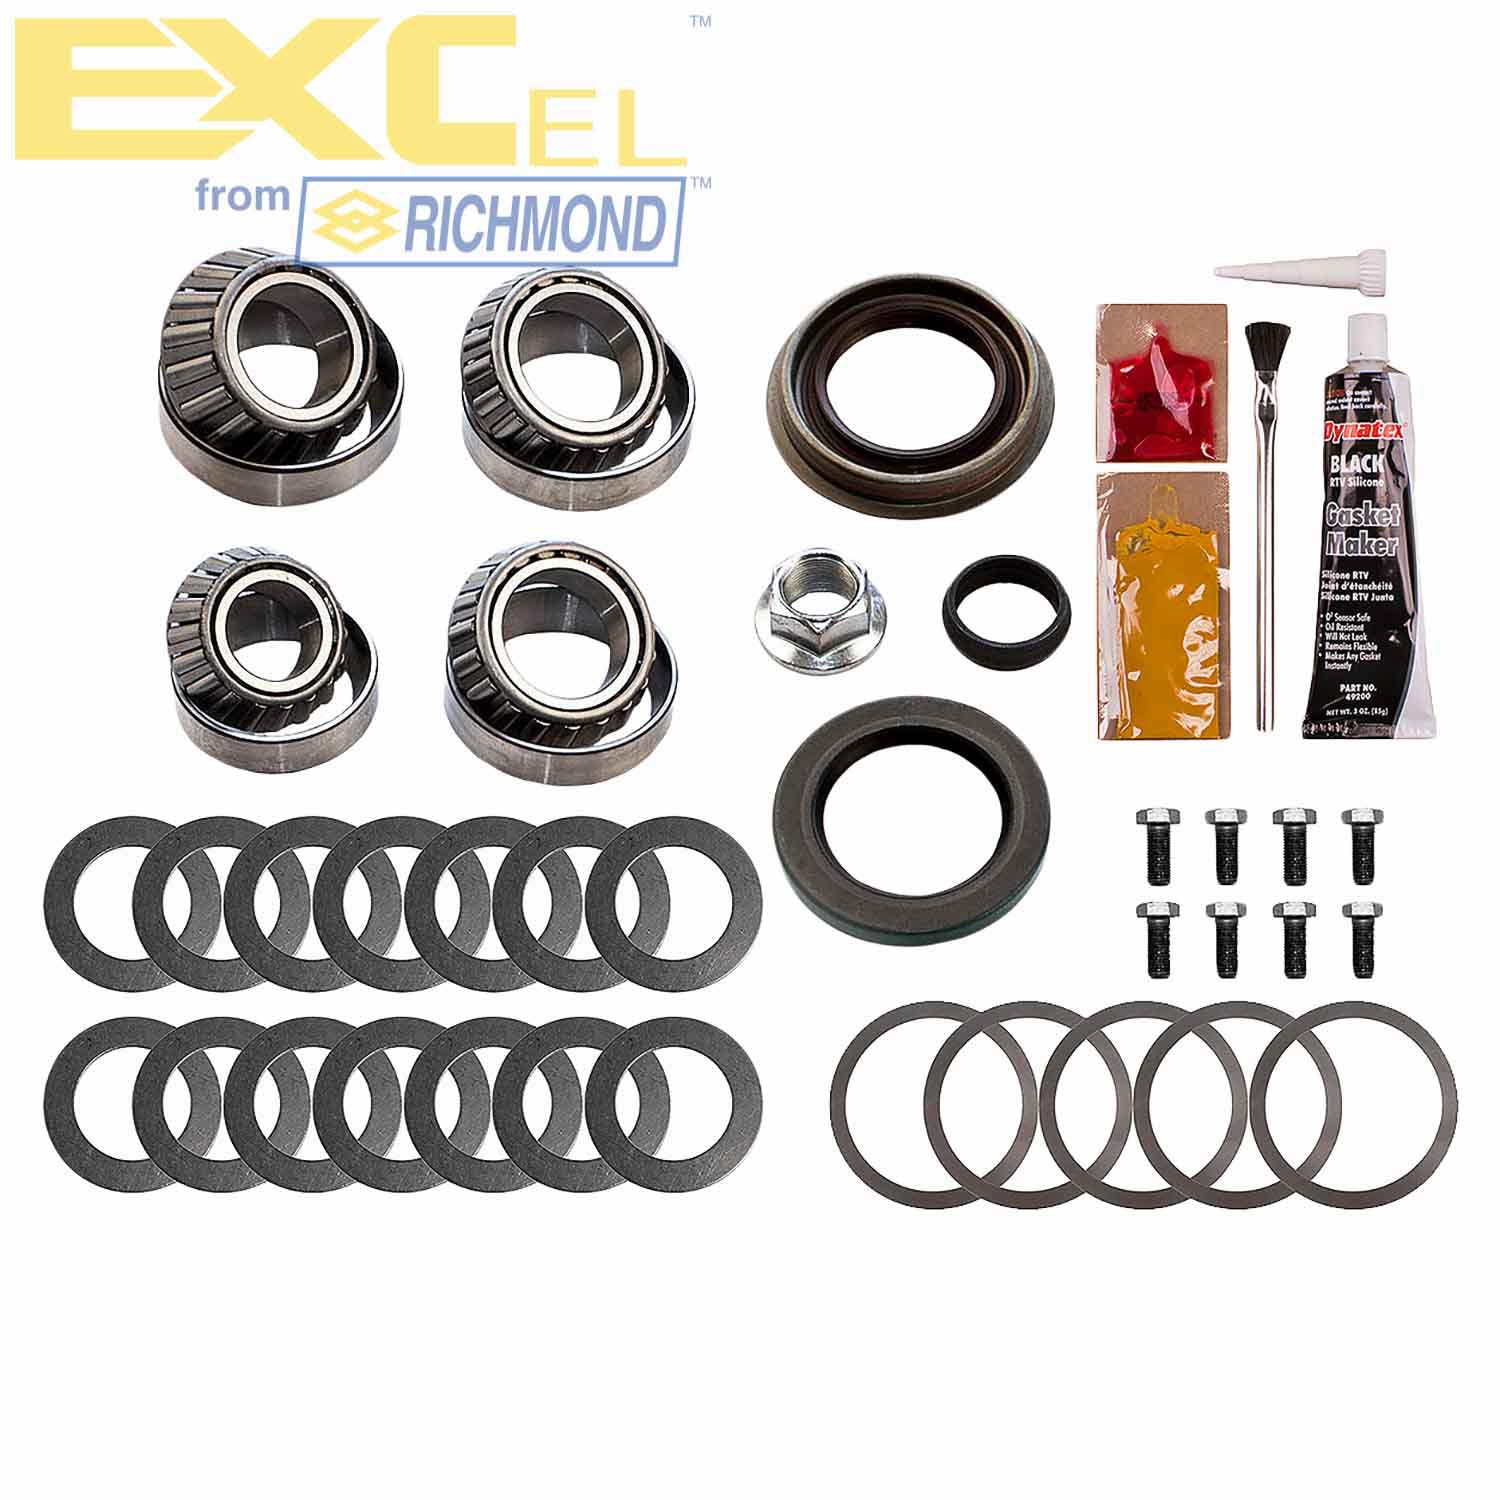 Excel XL-1060-1 Differential Bearing Kit